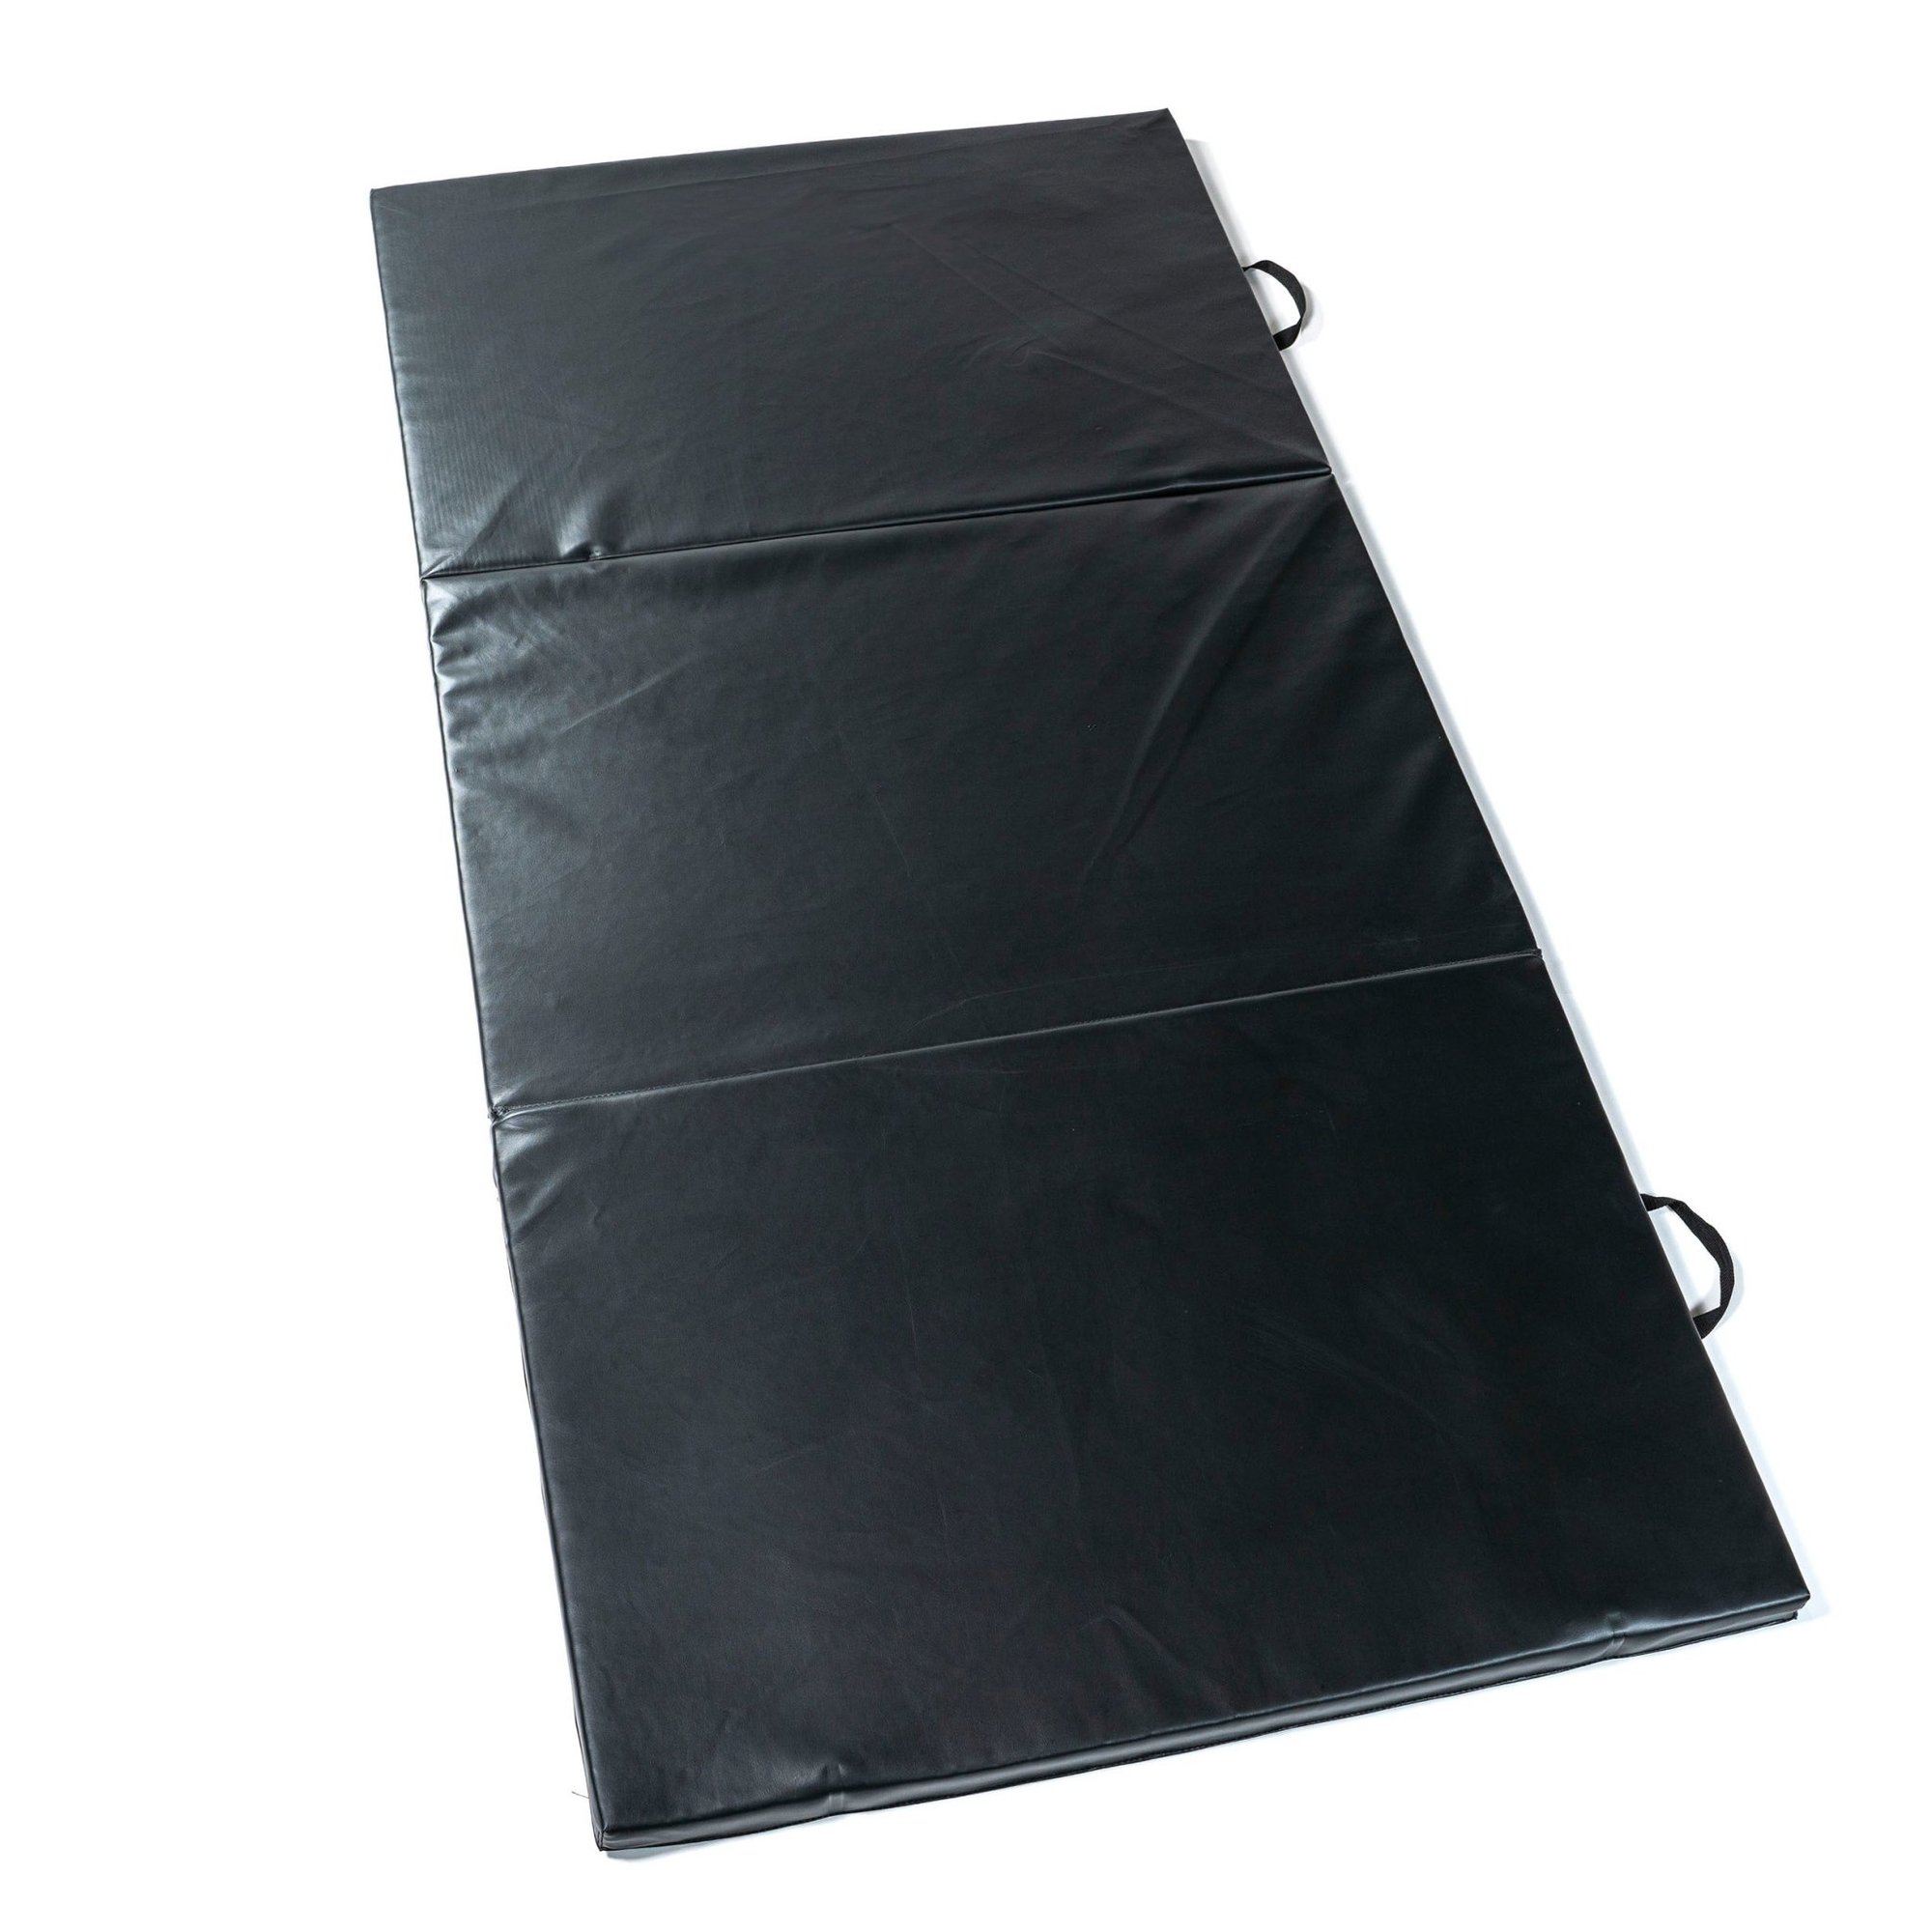 FitWay Equip. Folding Exercise Mat - 84"x48"